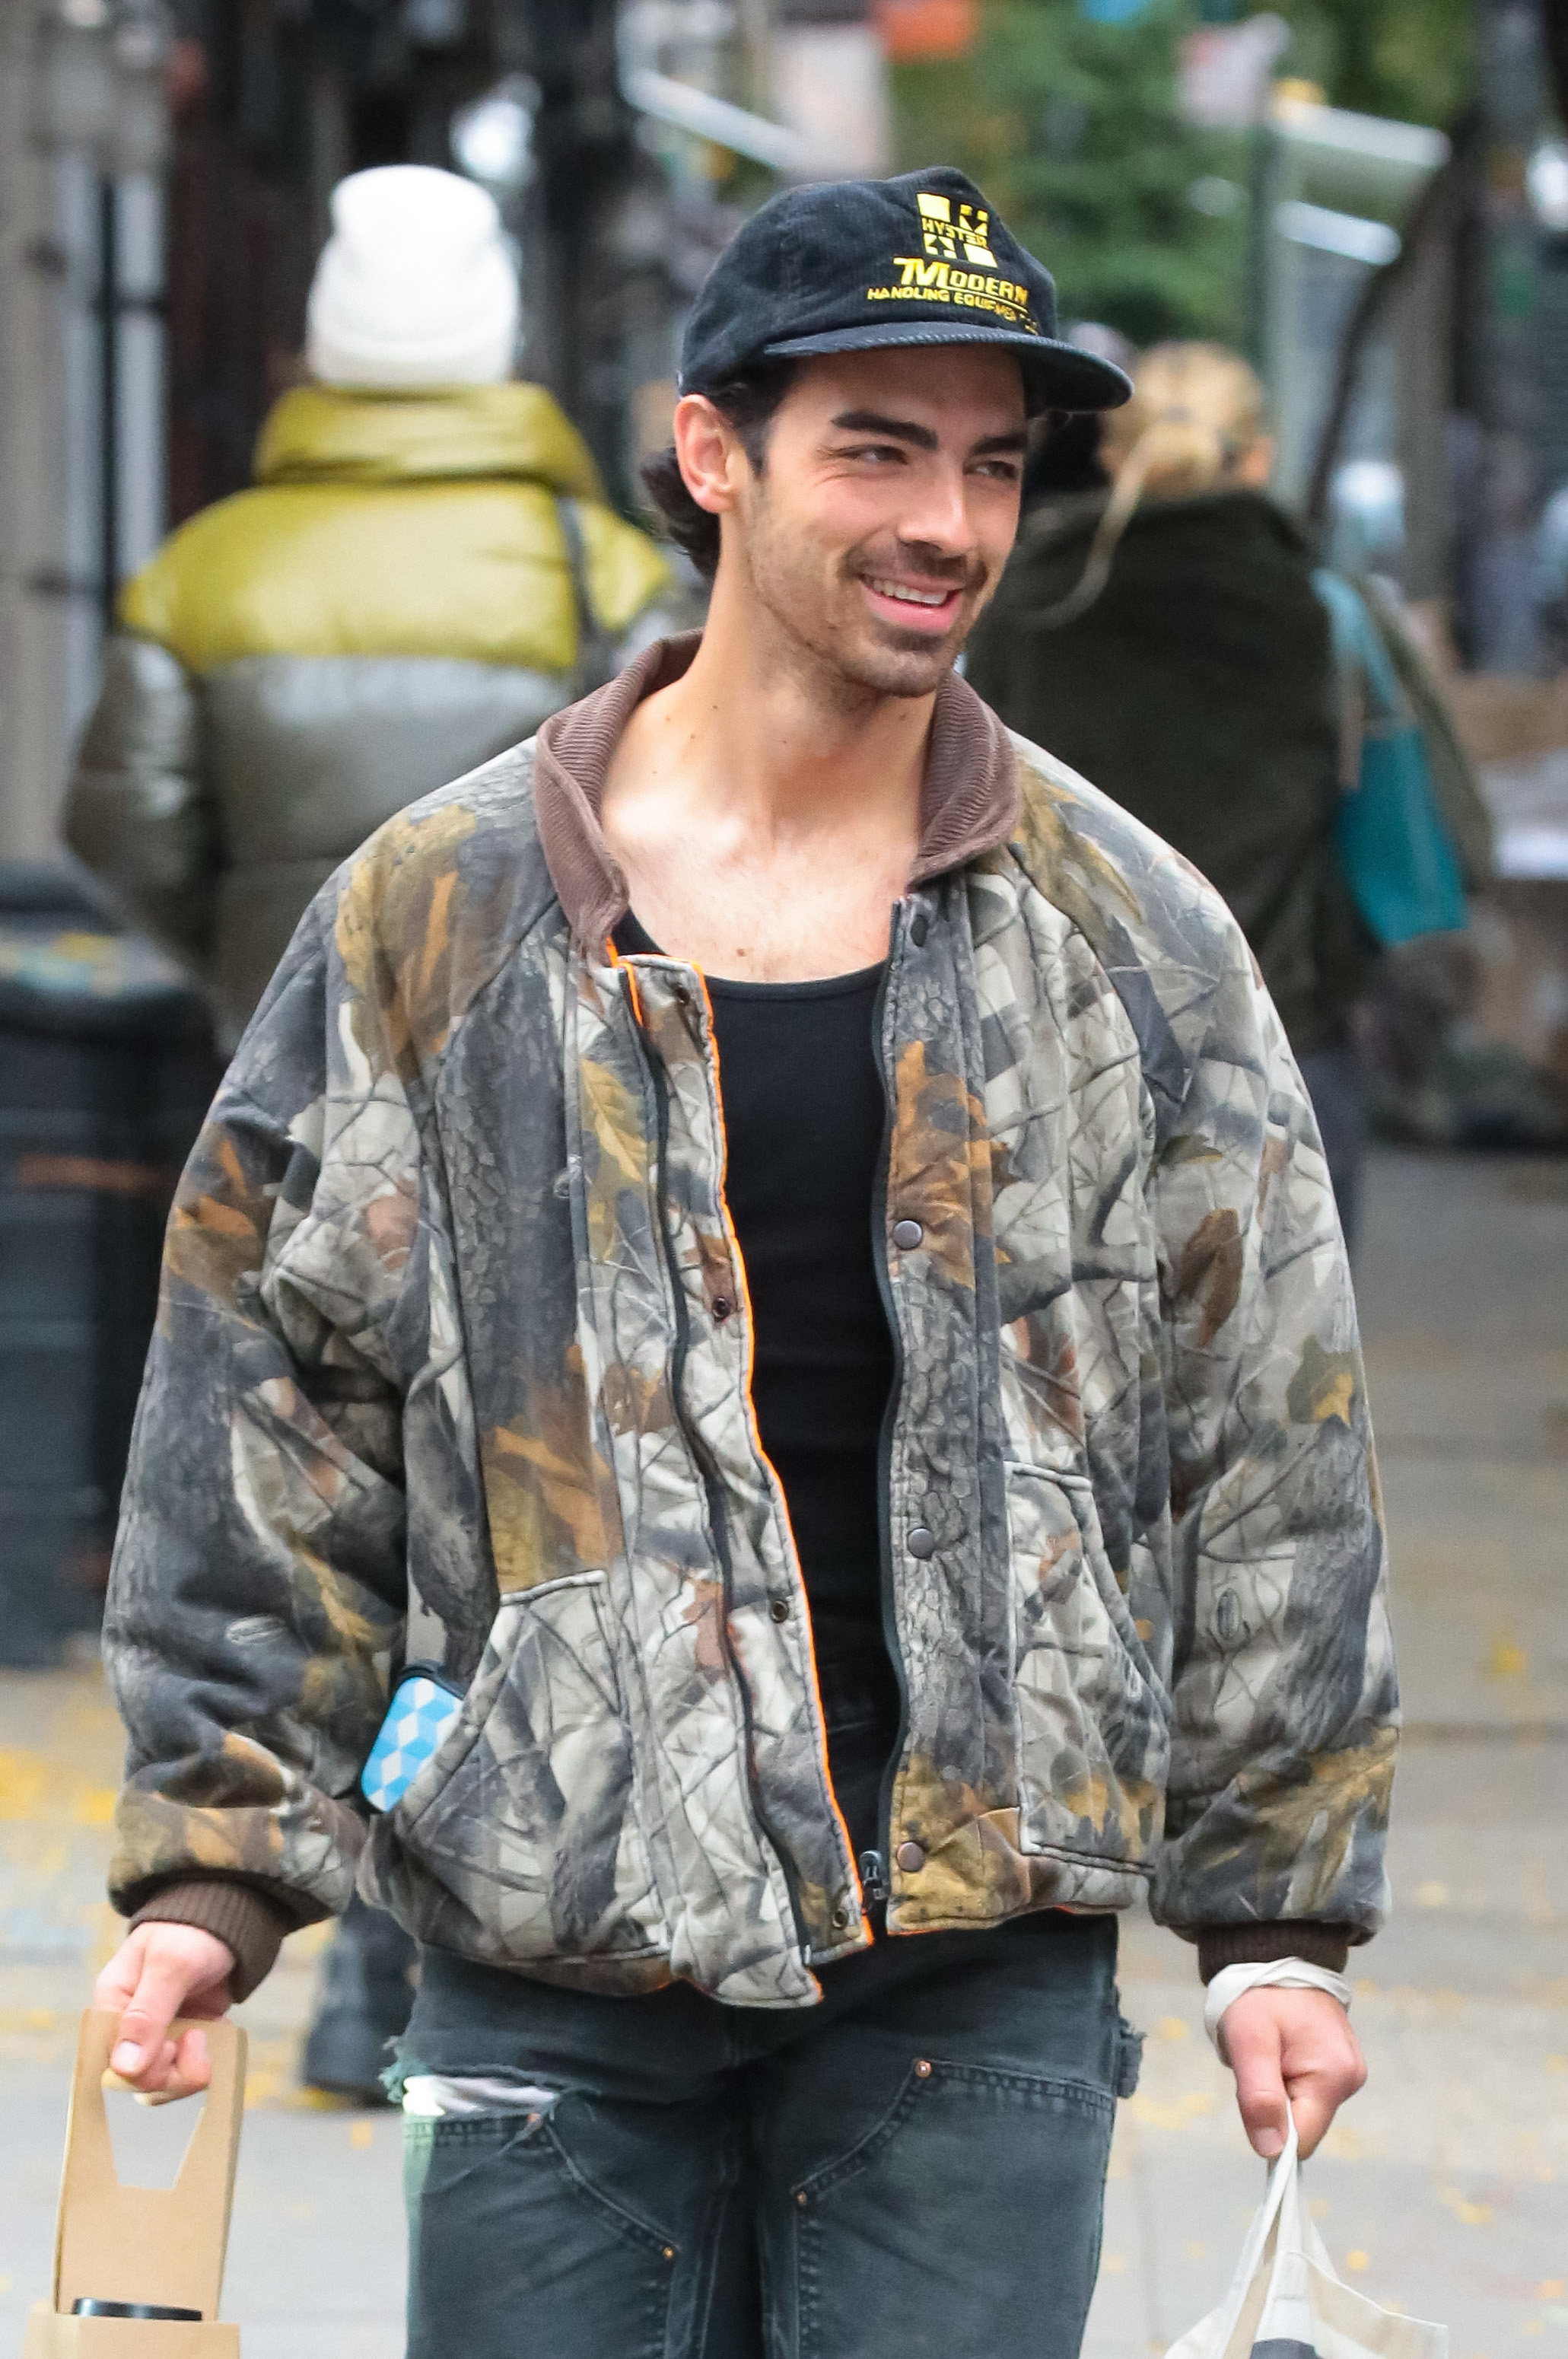 Joe outside smiling and wearing a cap, jacket, and jeans